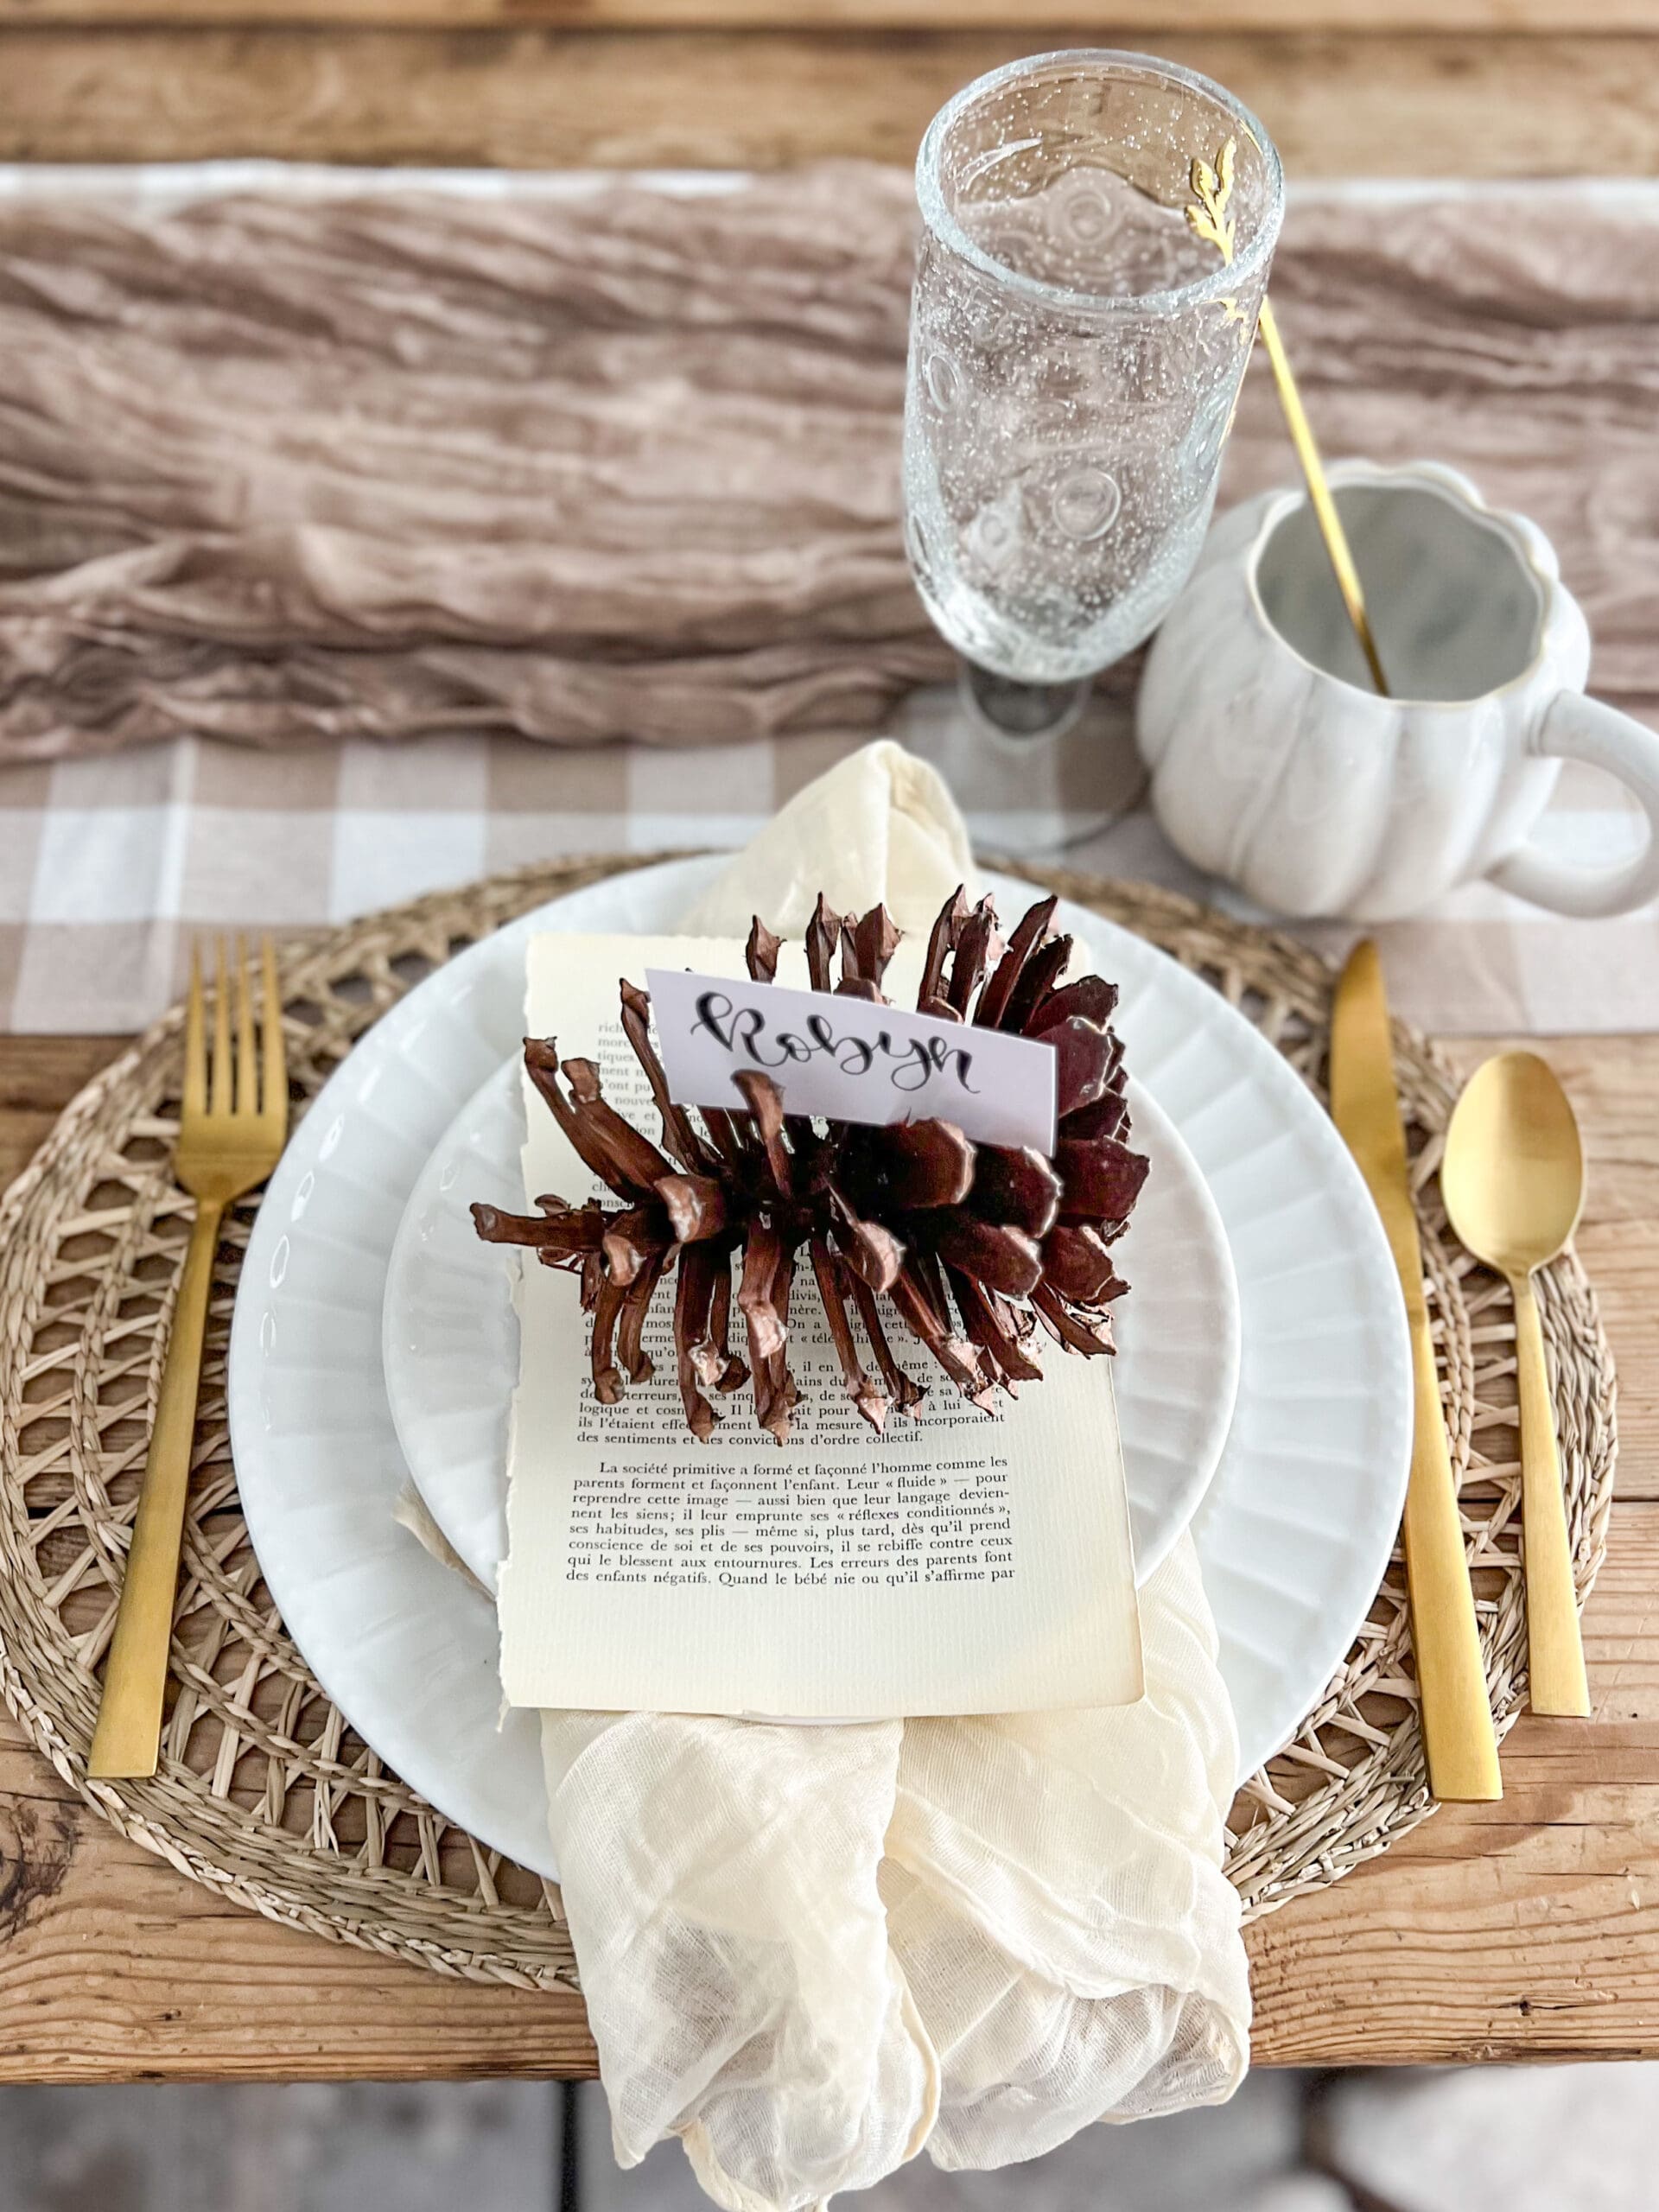 place setting with white dishes, a vintage book page, and a pinecone serving as a place card